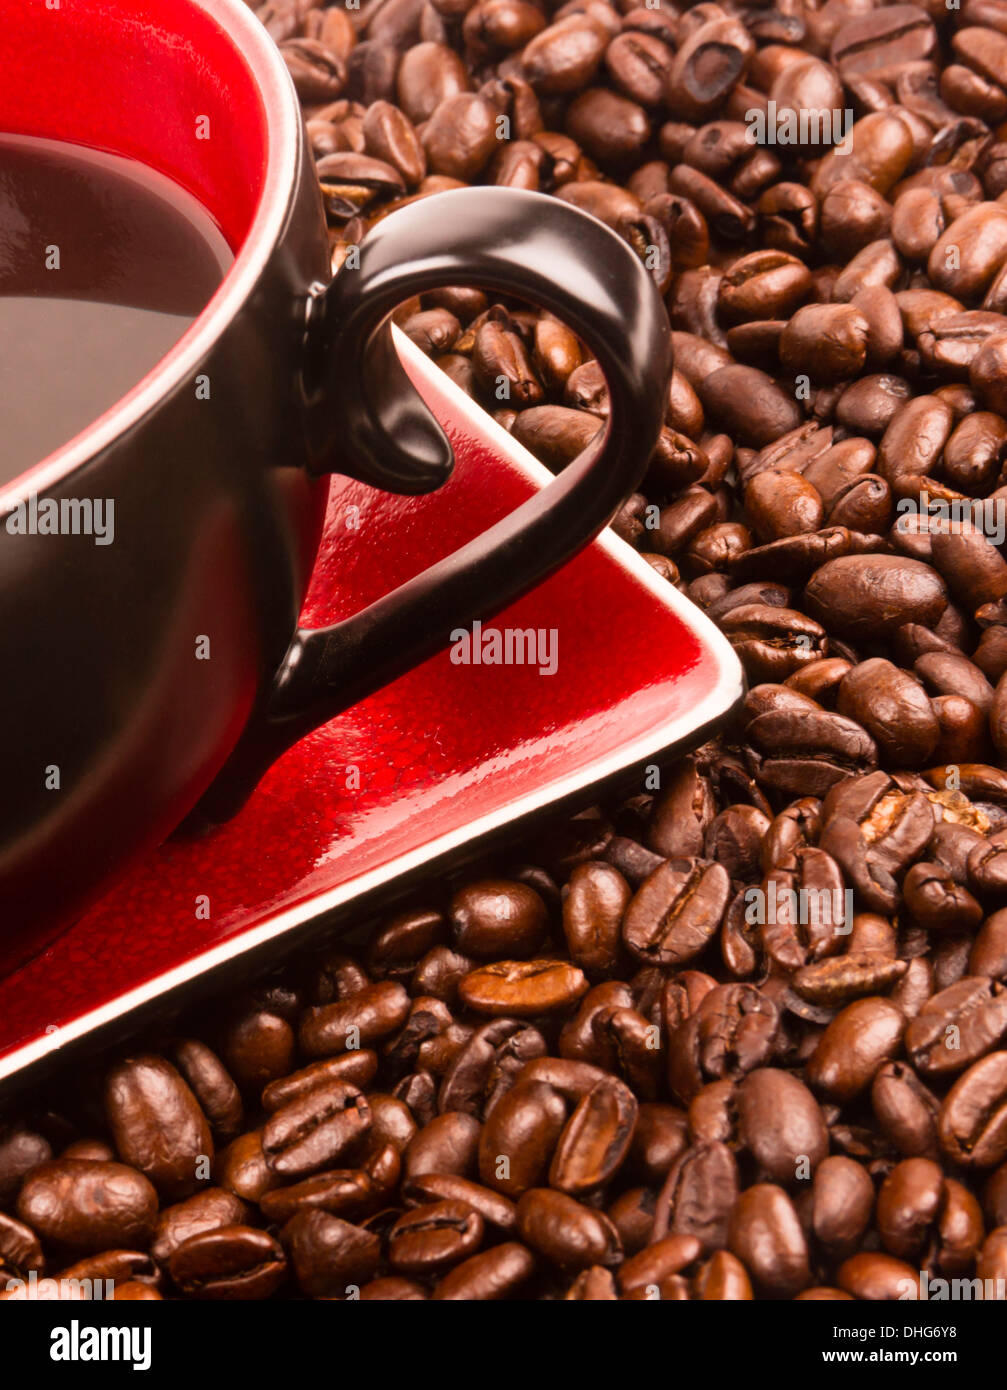 a flat pile group of roasted dark brown coffee beans with cup and saucer Stock Photo